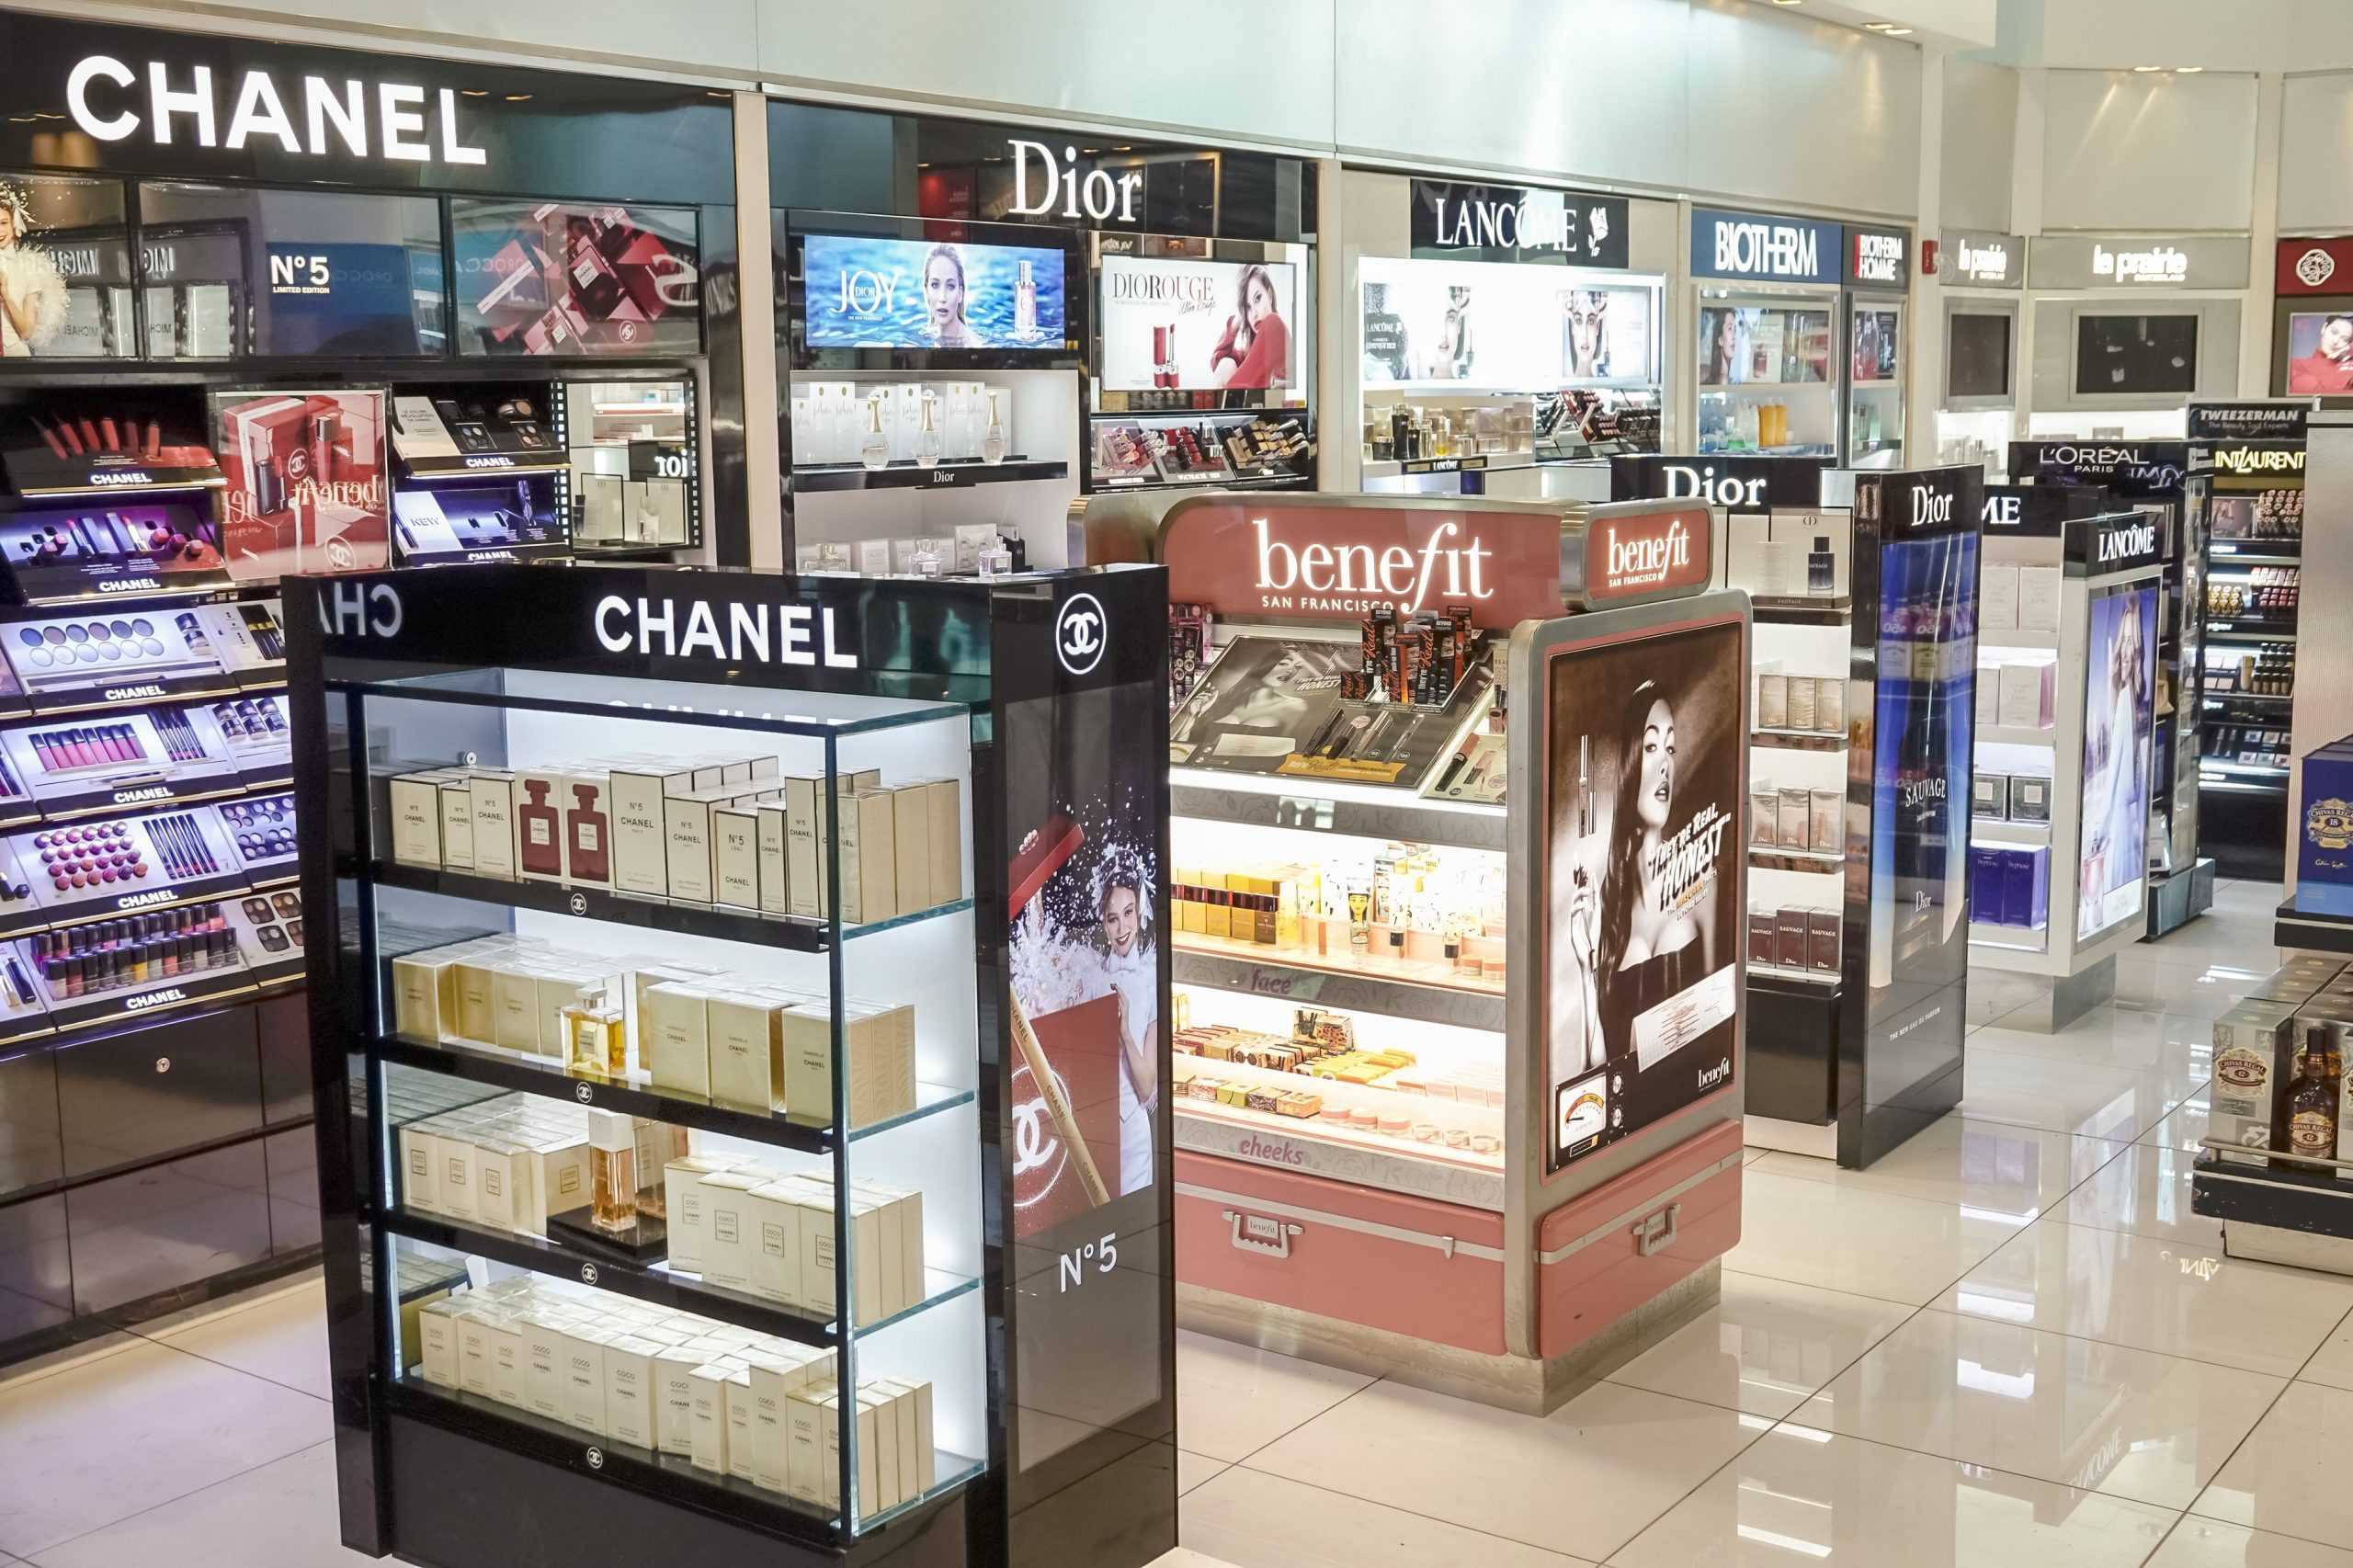 Why You Need Your Passport To Purchase Duty-Free Merchandise